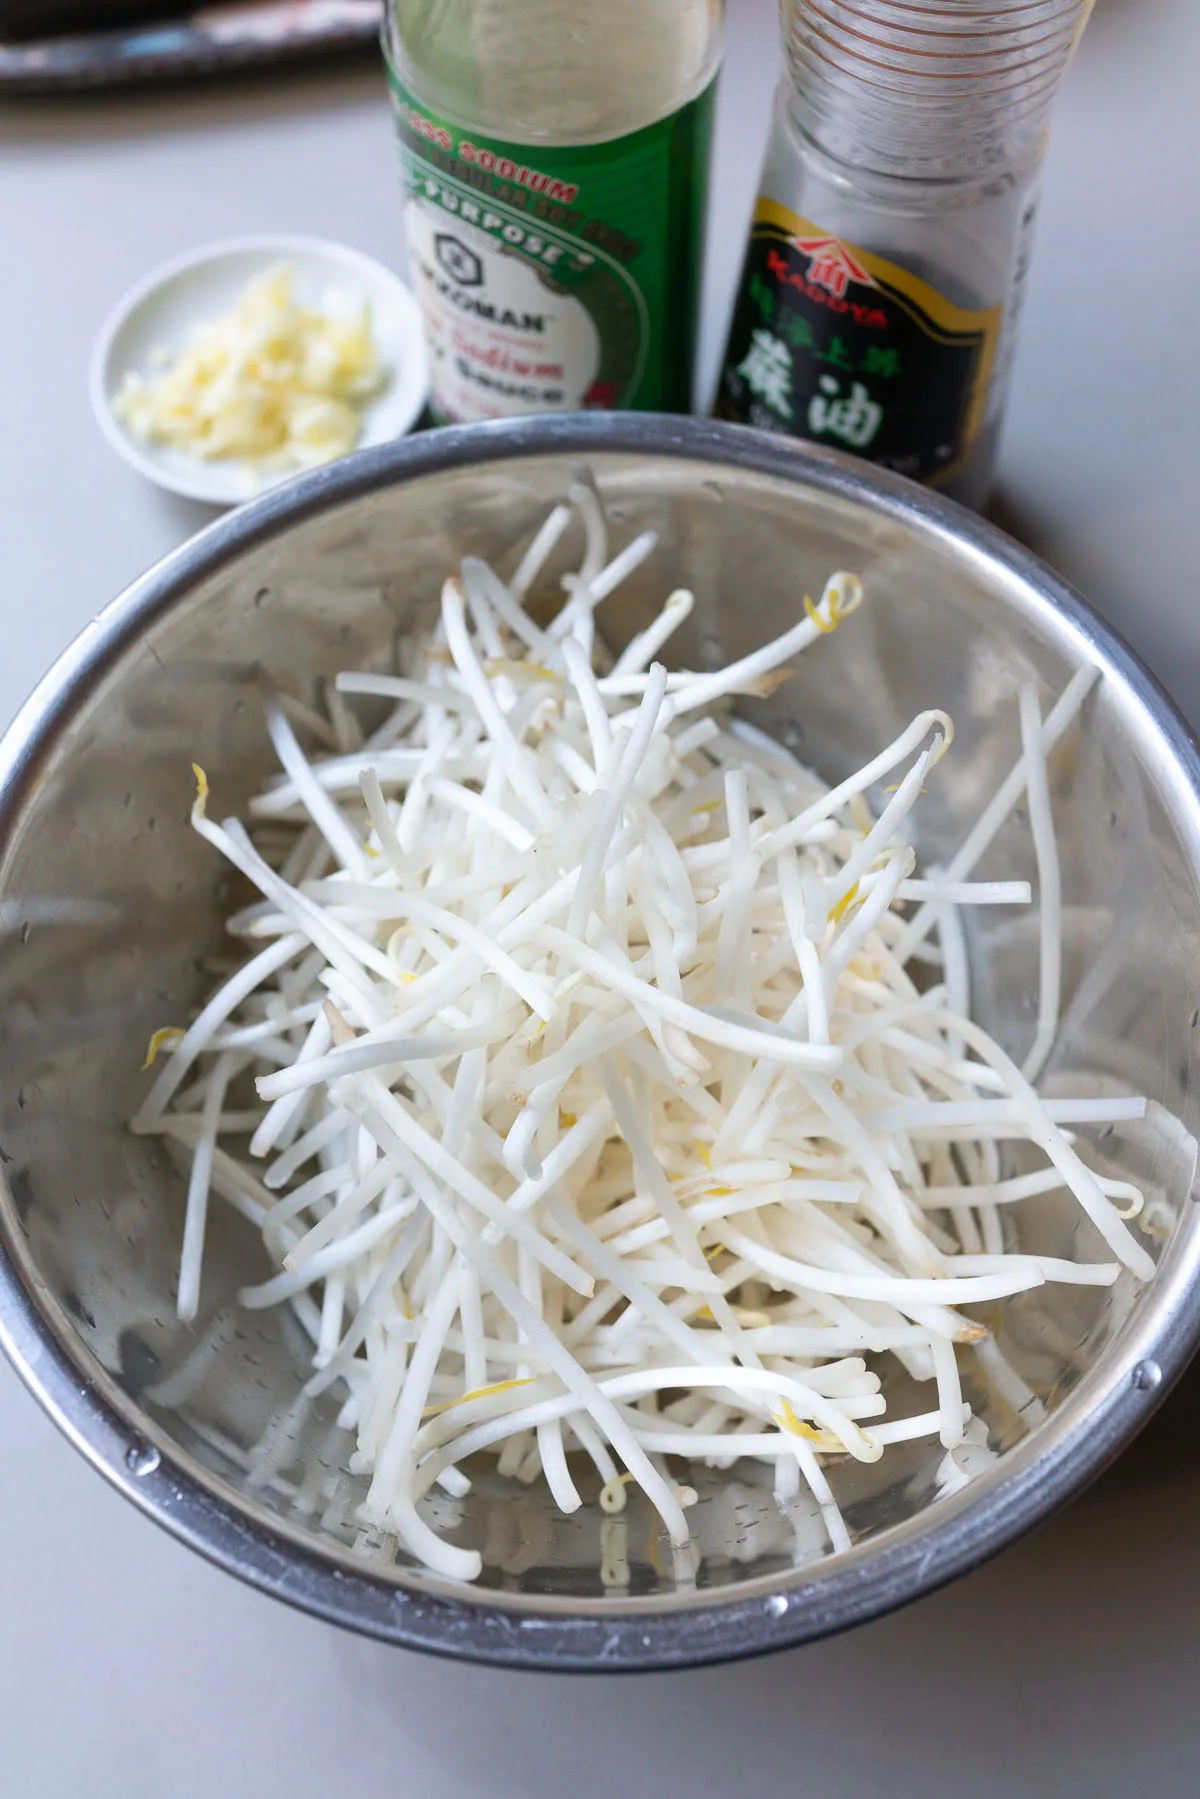 Ingredients for bean sprouts stir fry on a table (bean sprouts, garlic, soy sauce, and sesame oil). Not pictured: green onions and white pepper.